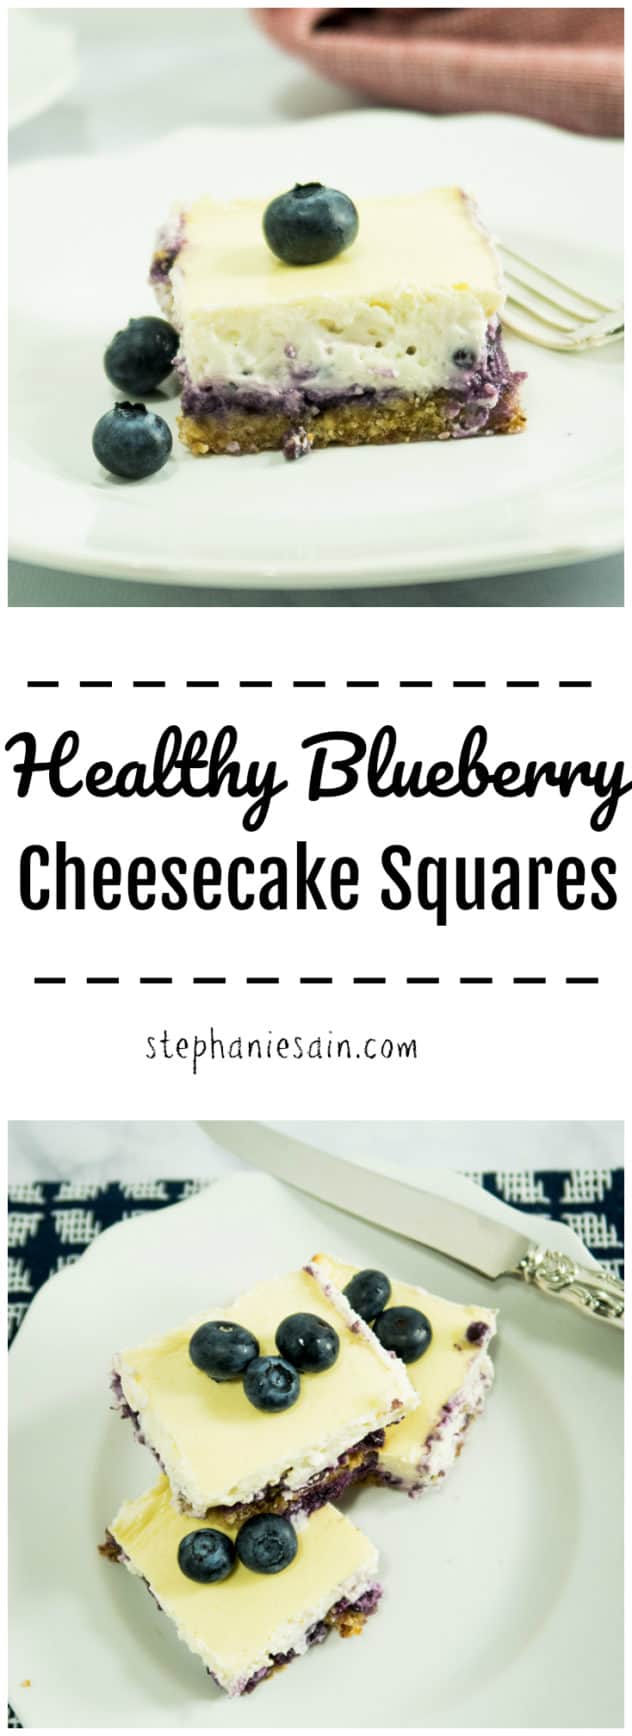 Healthy Blueberry Cheesecake Squares are the perfect little tasty bite sized treat. Lightened up and naturally sweetened for a treat you can feel good about eating. Gluten Free & Vegetarian.